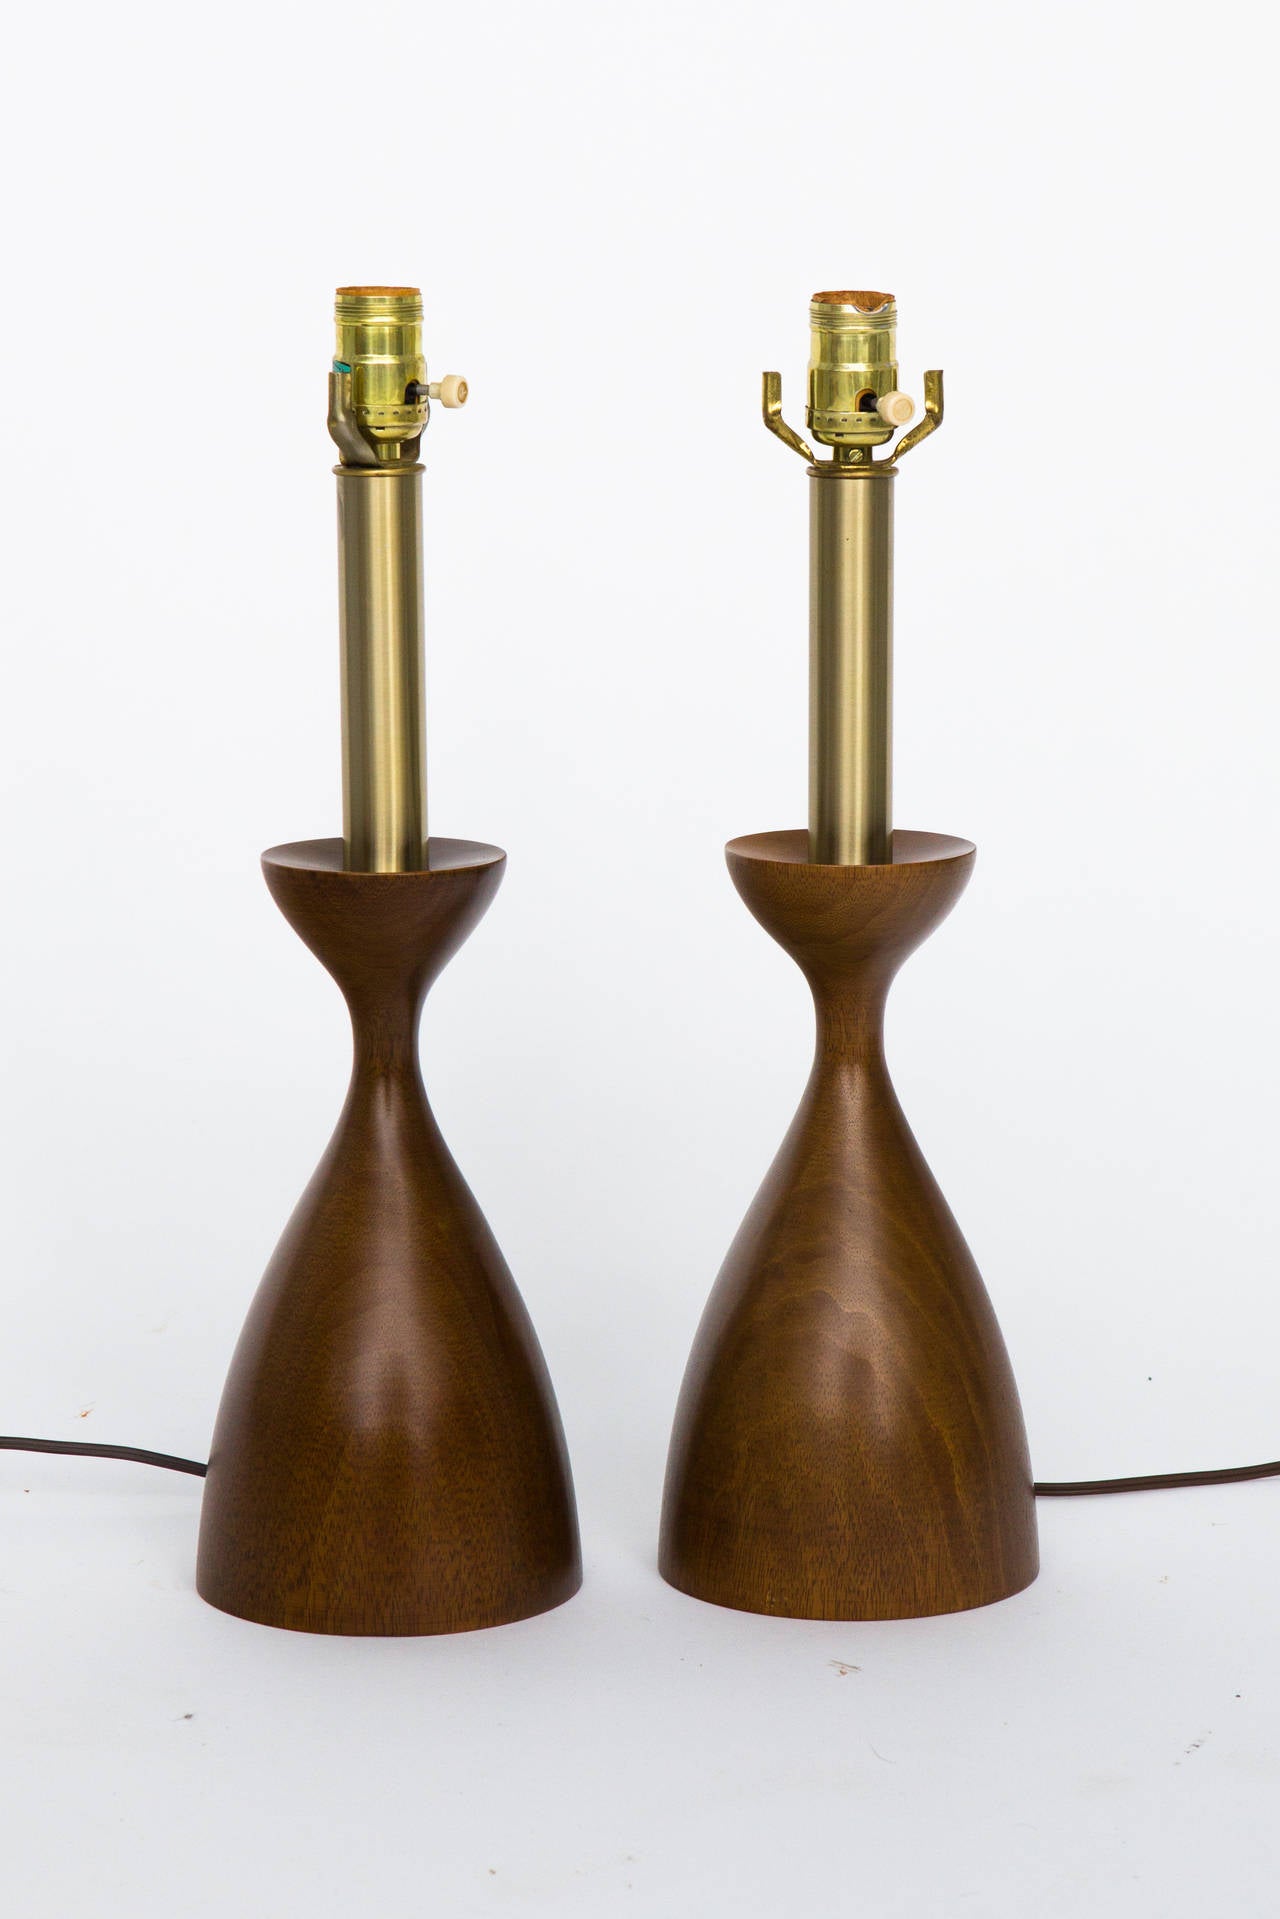 Pair of mid century brass and walnut table lamps by Laurel Lamp Company.